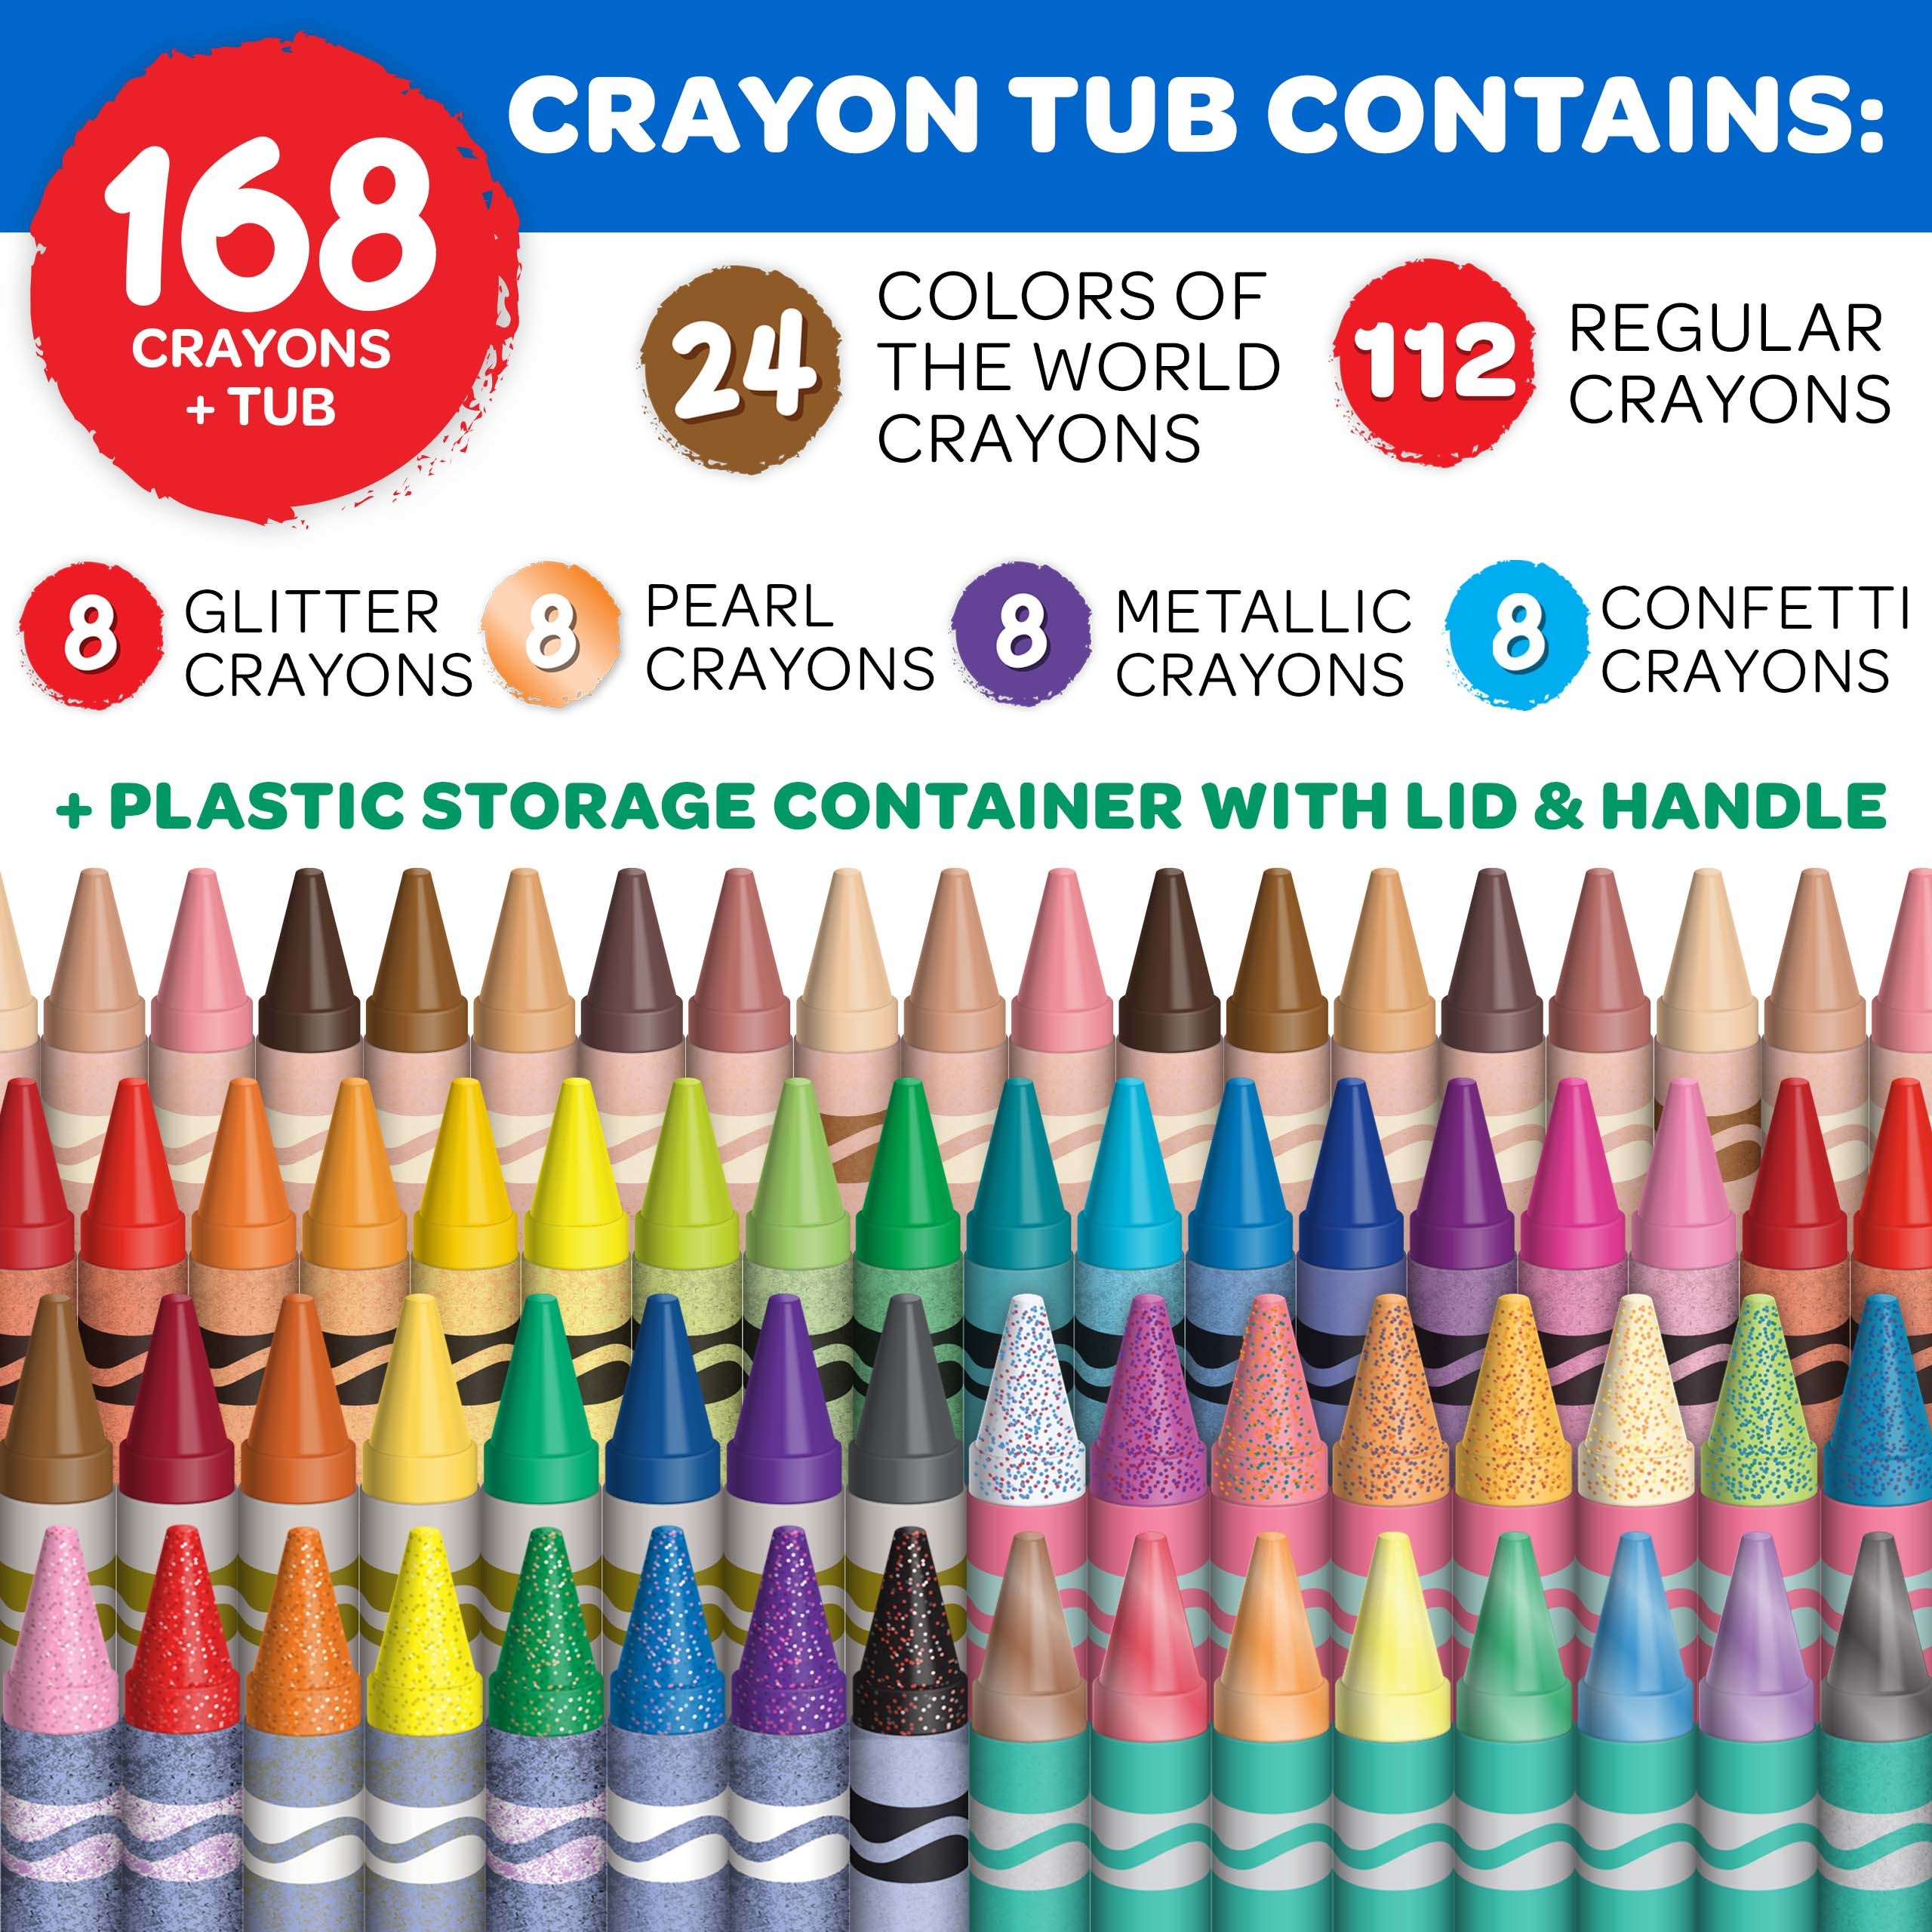 Crayola Crayon & Storage Tub, School Supplies, 168 Ct, with Colors of the World Crayons, Holiday Gift for Kids - image 7 of 9